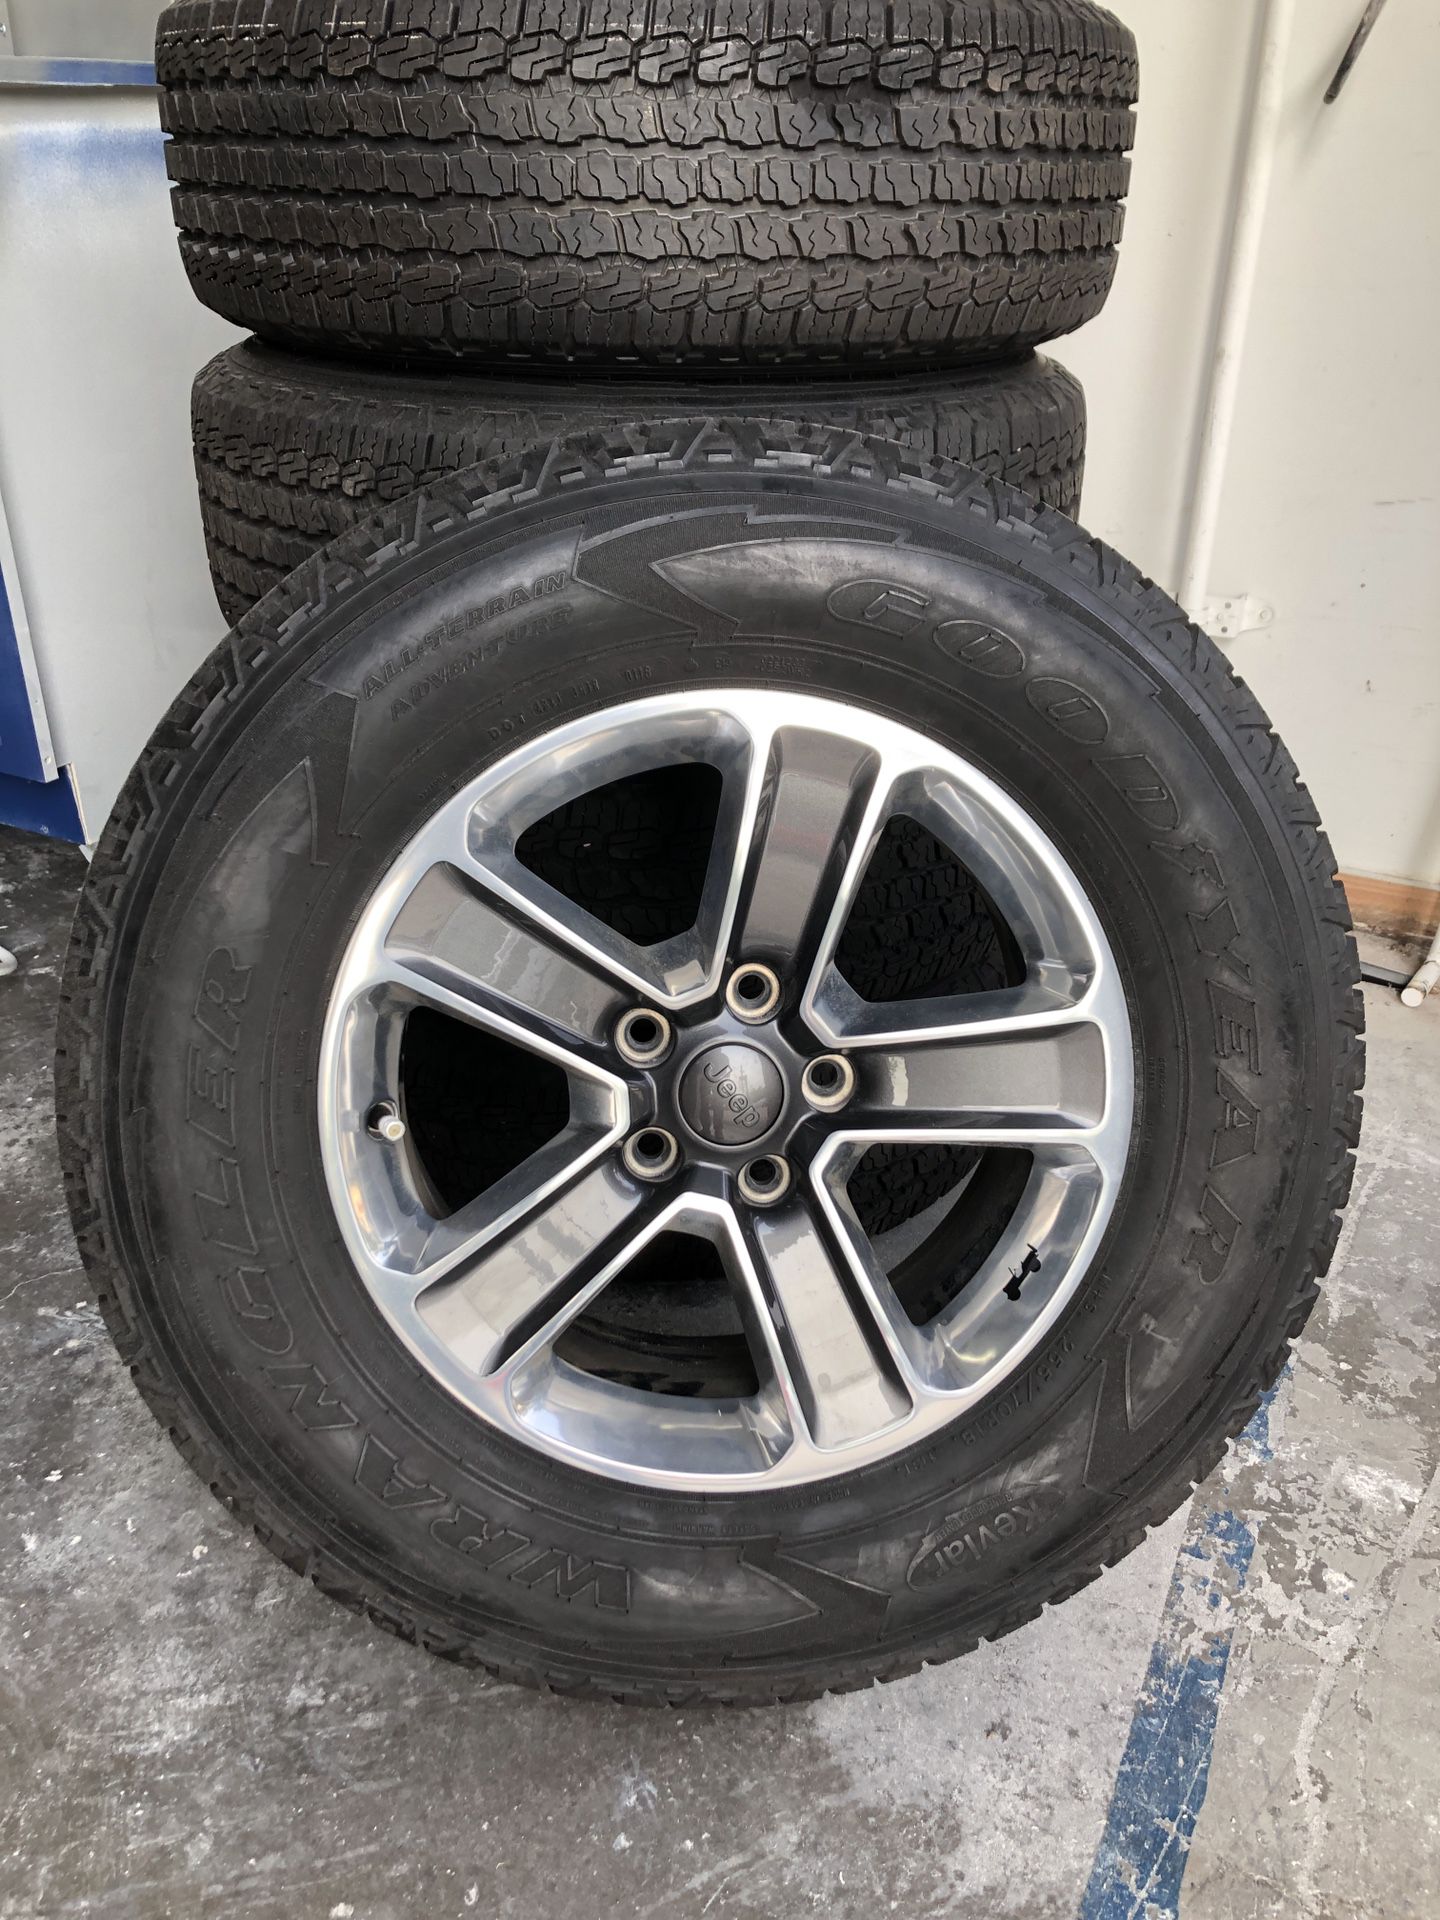 Jeep Wrangler rims and tires- like new 2018